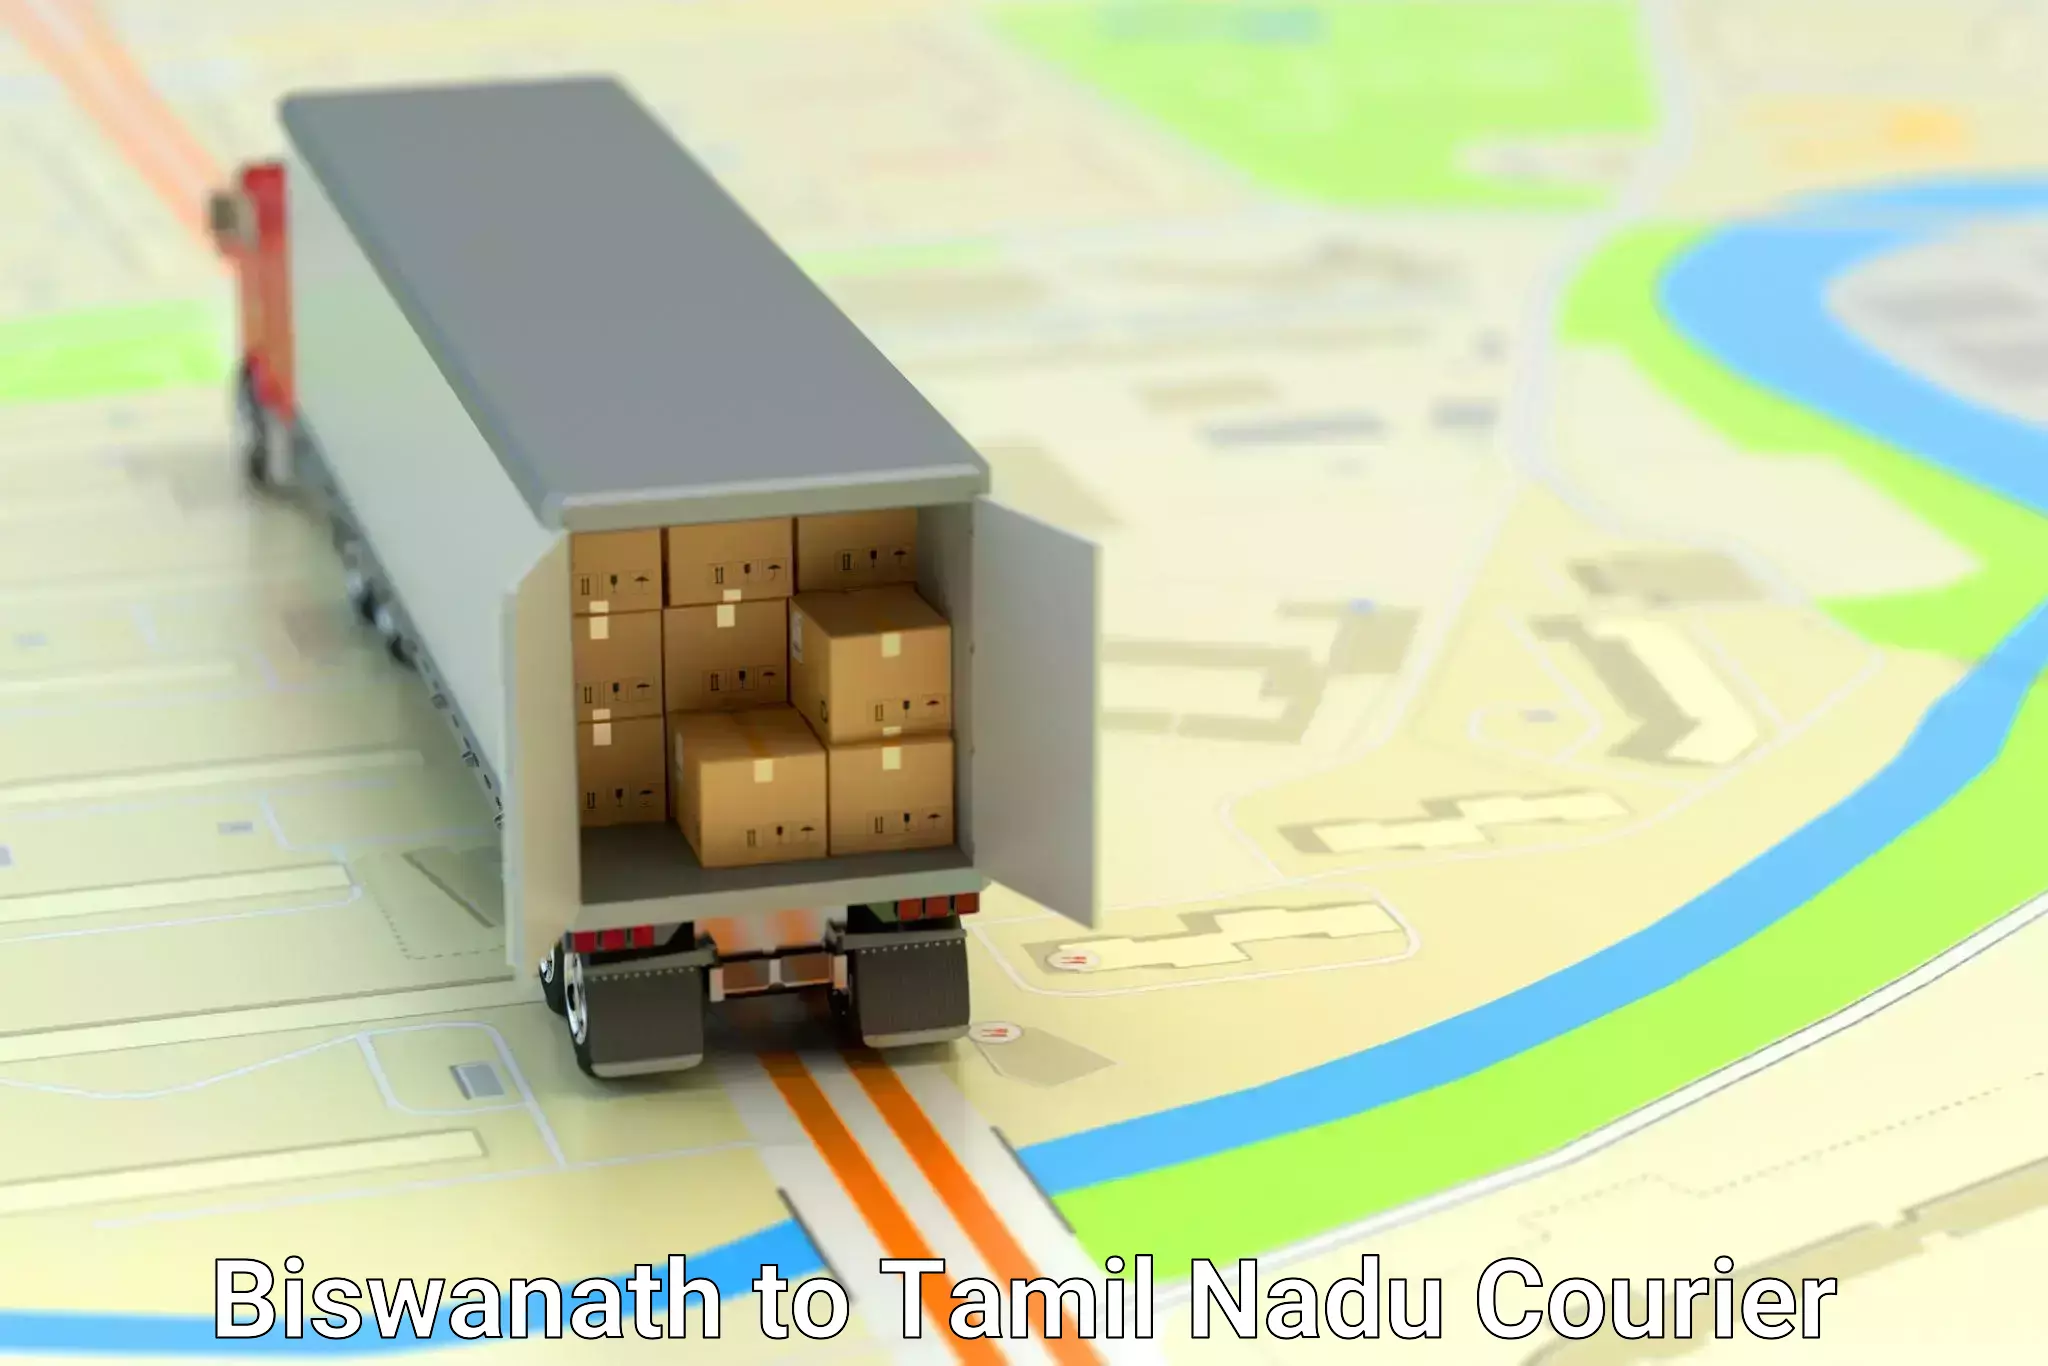 Comprehensive shipping network Biswanath to Thanjavur